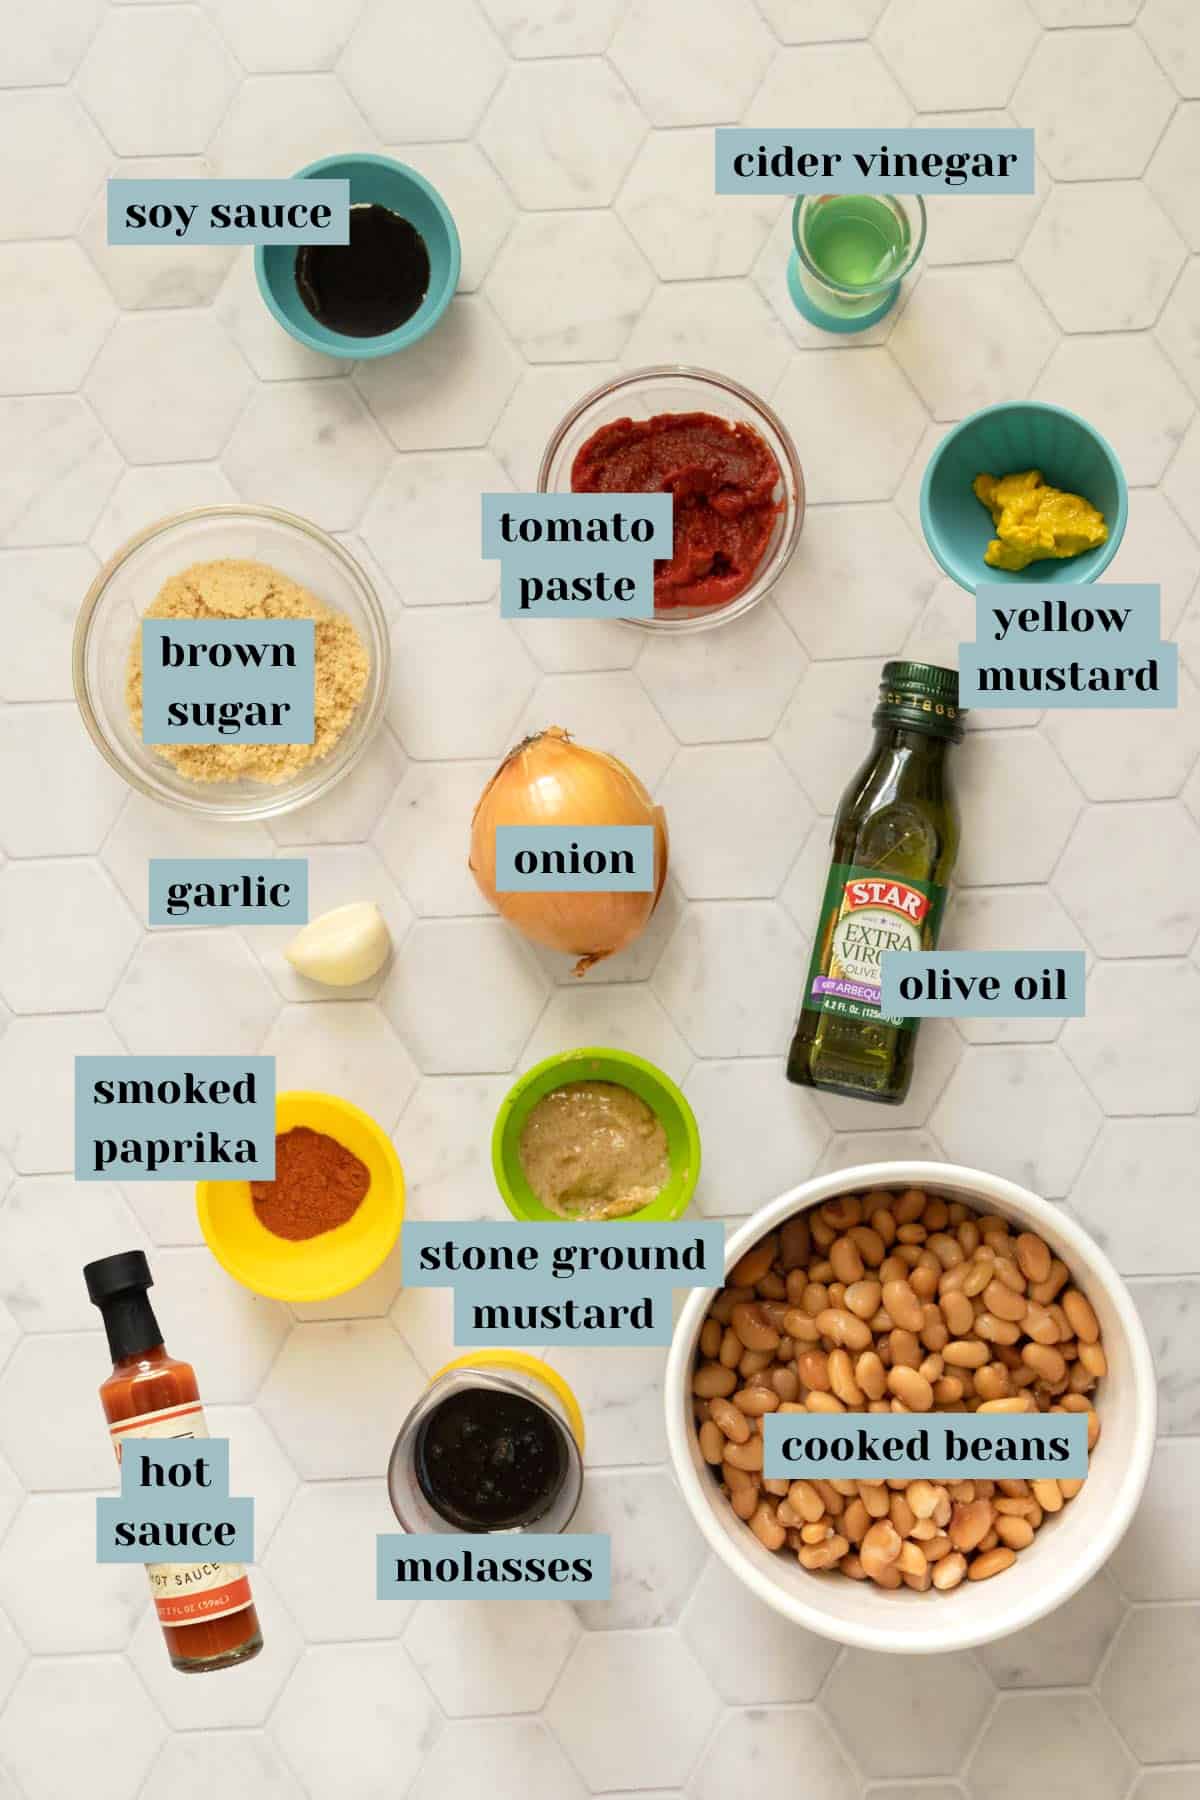 Ingredients for vegetarian baked beans on a tile surface with labels.